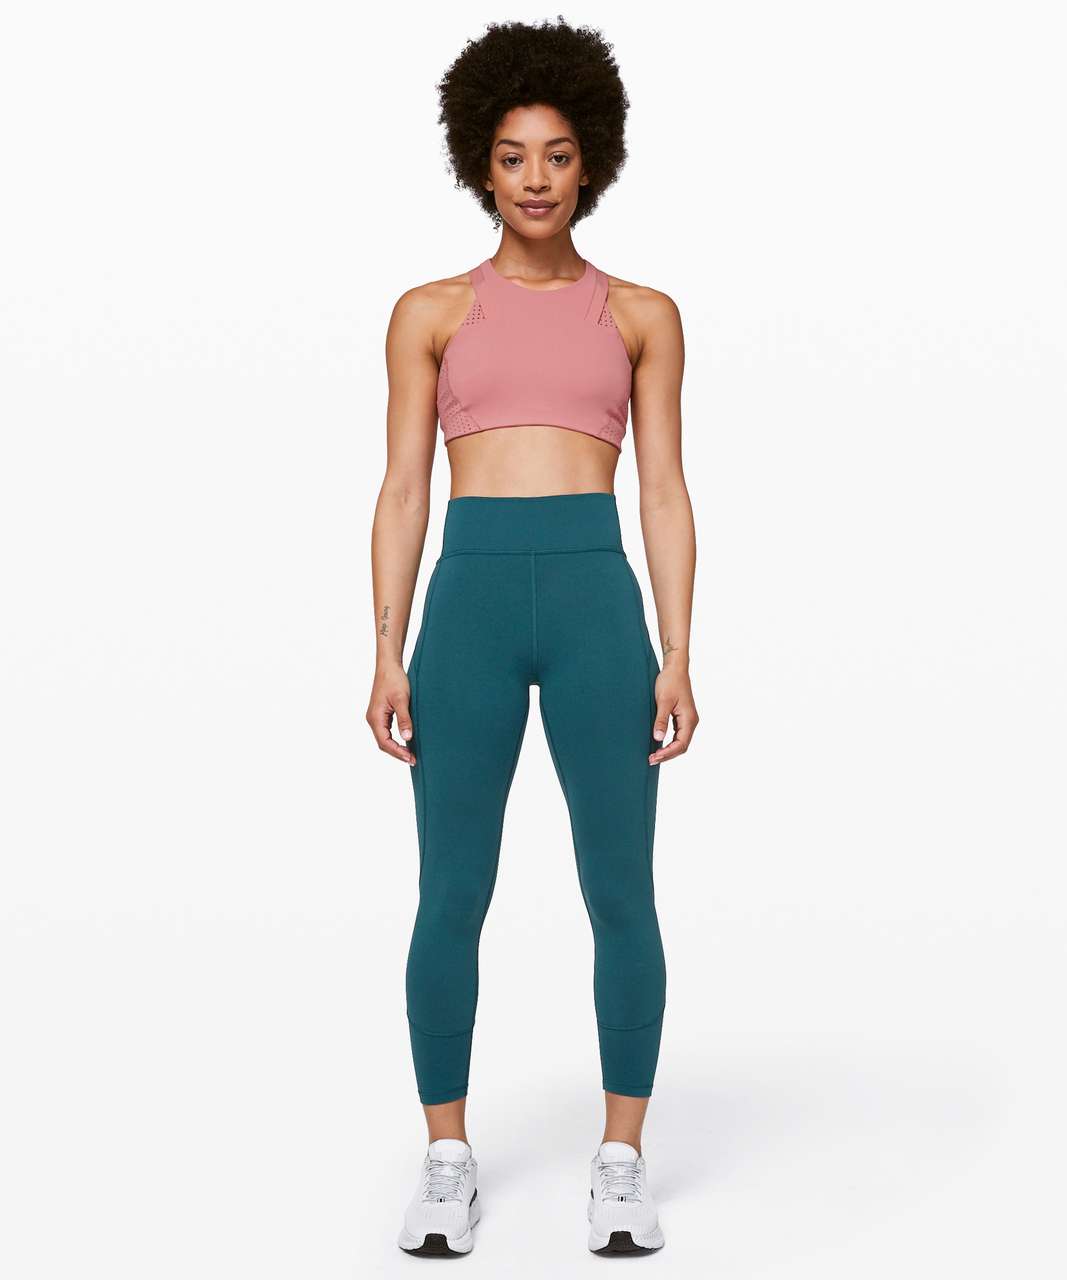 Lululemon In Movement Tight 25 *Everlux Bermuda Teal Women's Size 2 NWTs